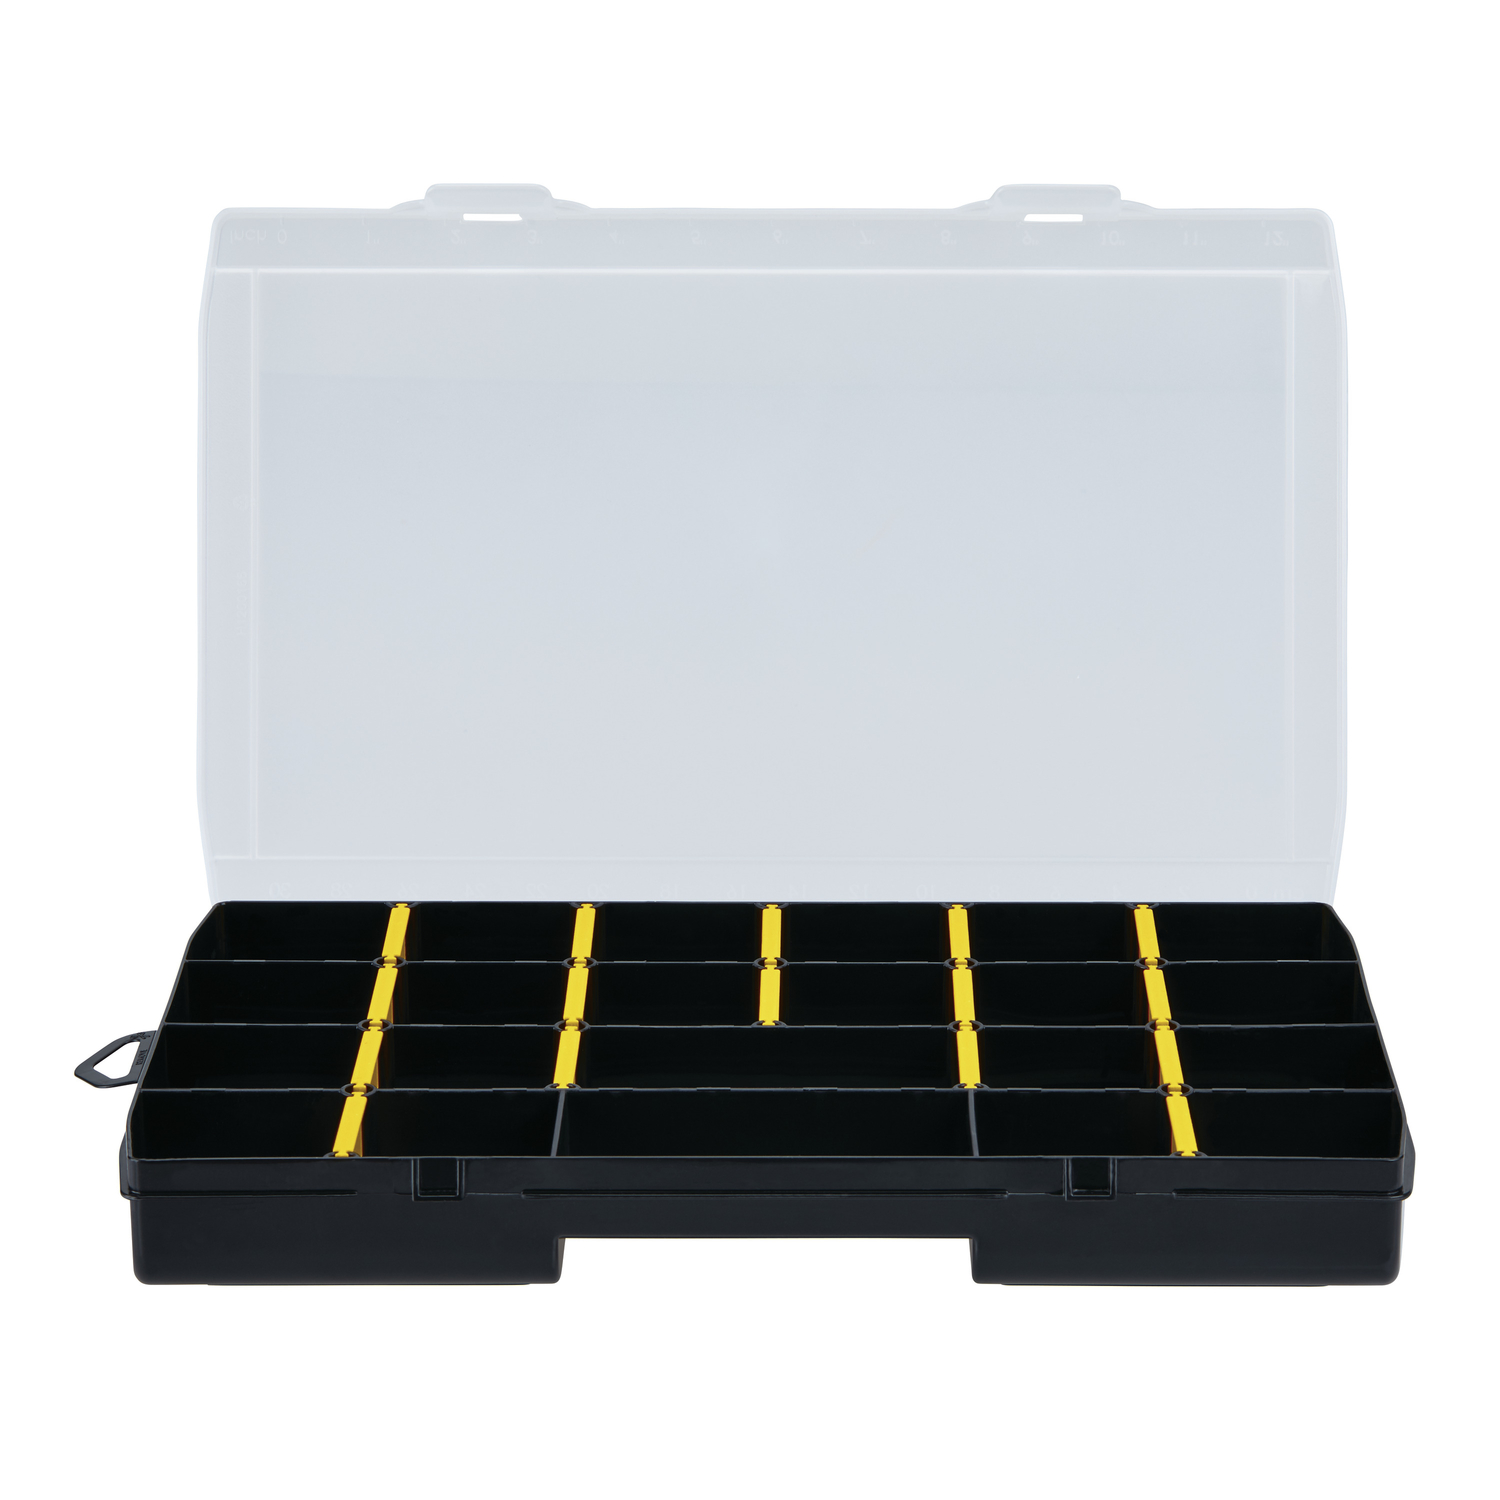 Photos - Tool Box Stanley 14 in.  Organizer Multicolored STST14114 